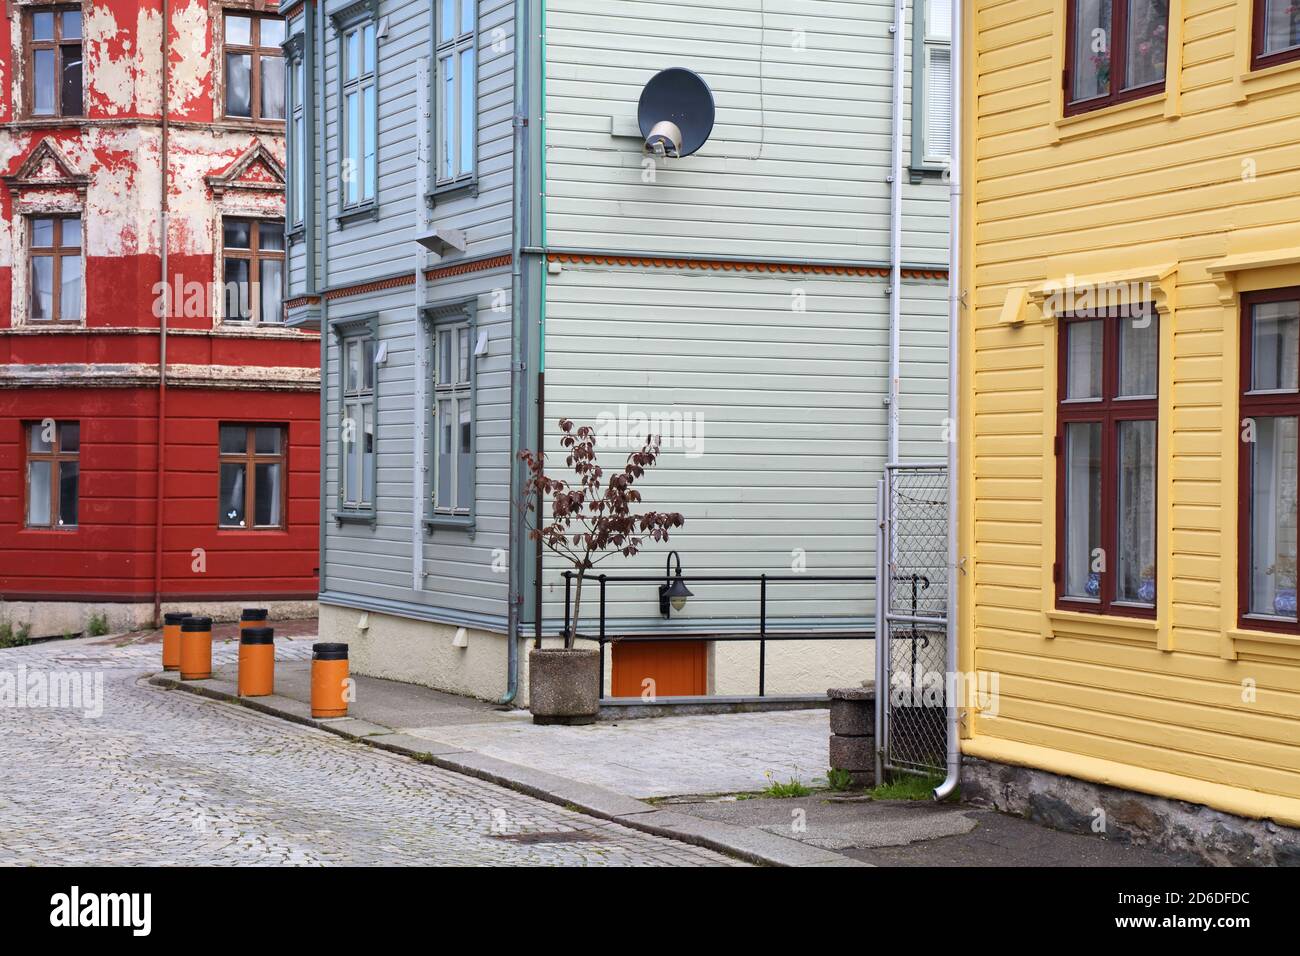 Haugesund city in Norway. Colorful wooden houses in the Old Town. Stock Photo